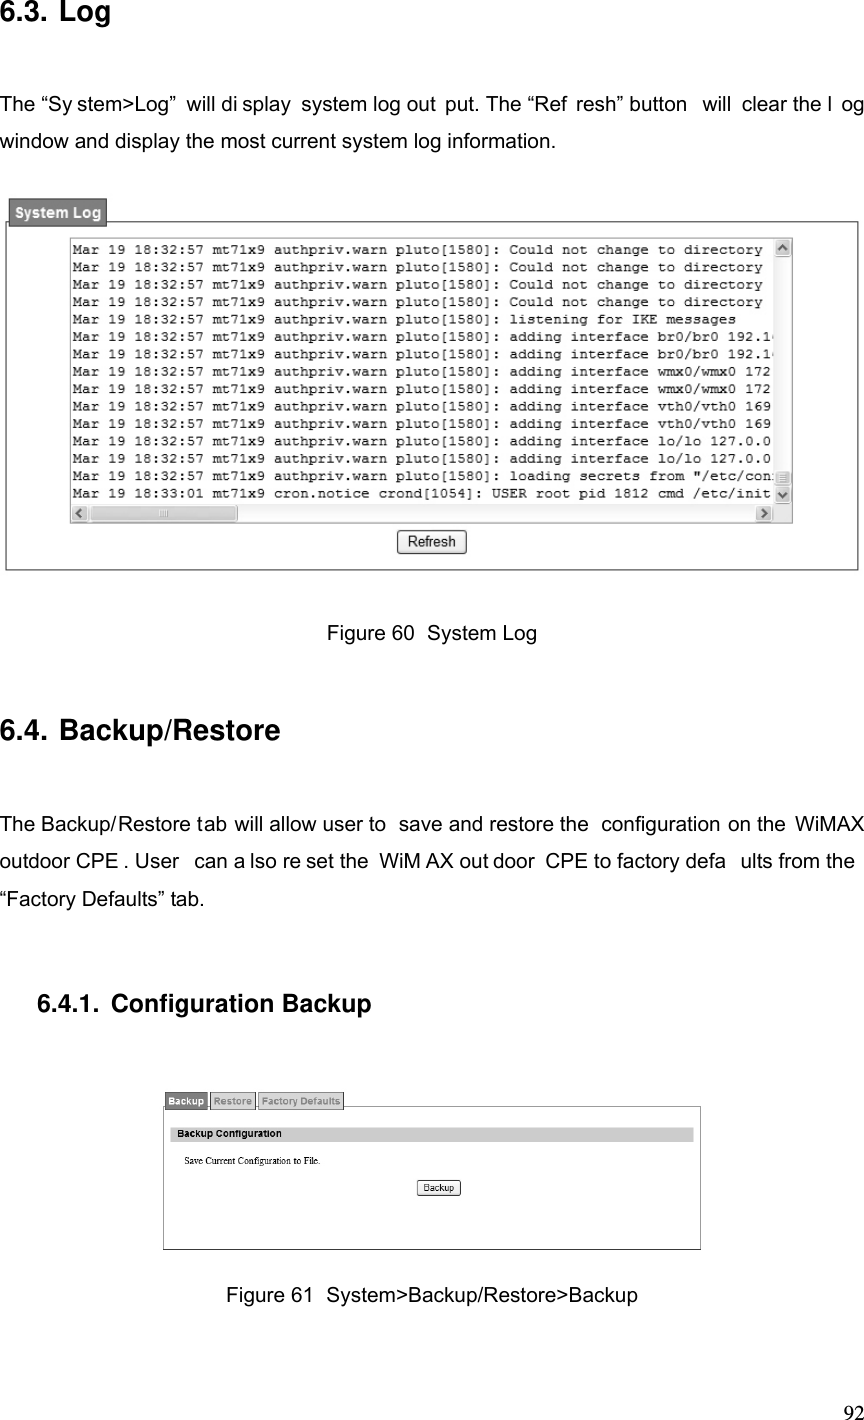  926.3. Log The “Sy stem&gt;Log” will di splay system log out put. The “Ref resh” button  will clear the l og window and display the most current system log information.  Figure 60  System Log 6.4. Backup/Restore The Backup/Restore tab will allow user to  save and restore the  configuration on the WiMAX outdoor CPE . User  can a lso re set the  WiM AX out door CPE to factory defa ults from the  “Factory Defaults” tab. 6.4.1. Configuration Backup  Figure 61  System&gt;Backup/Restore&gt;Backup